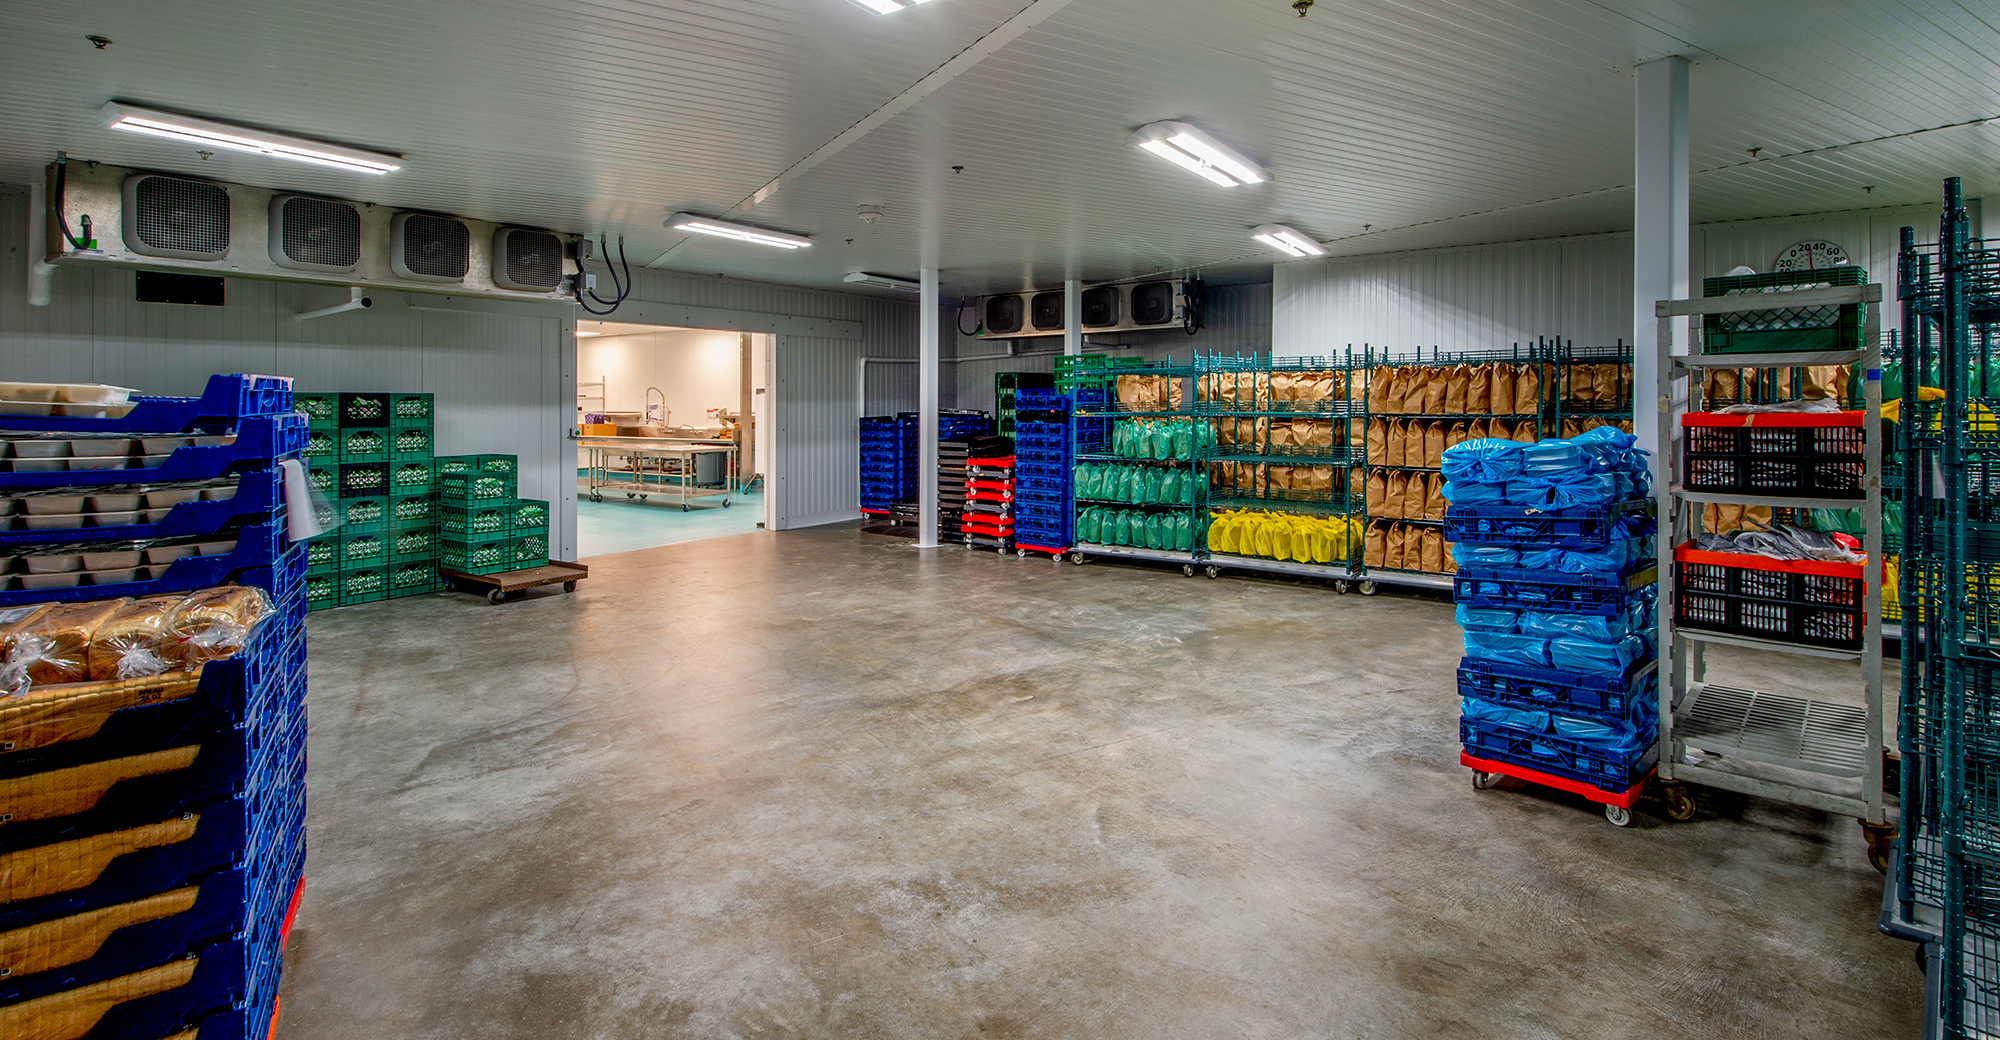 Farmers pleased with the operation of cold storage facility